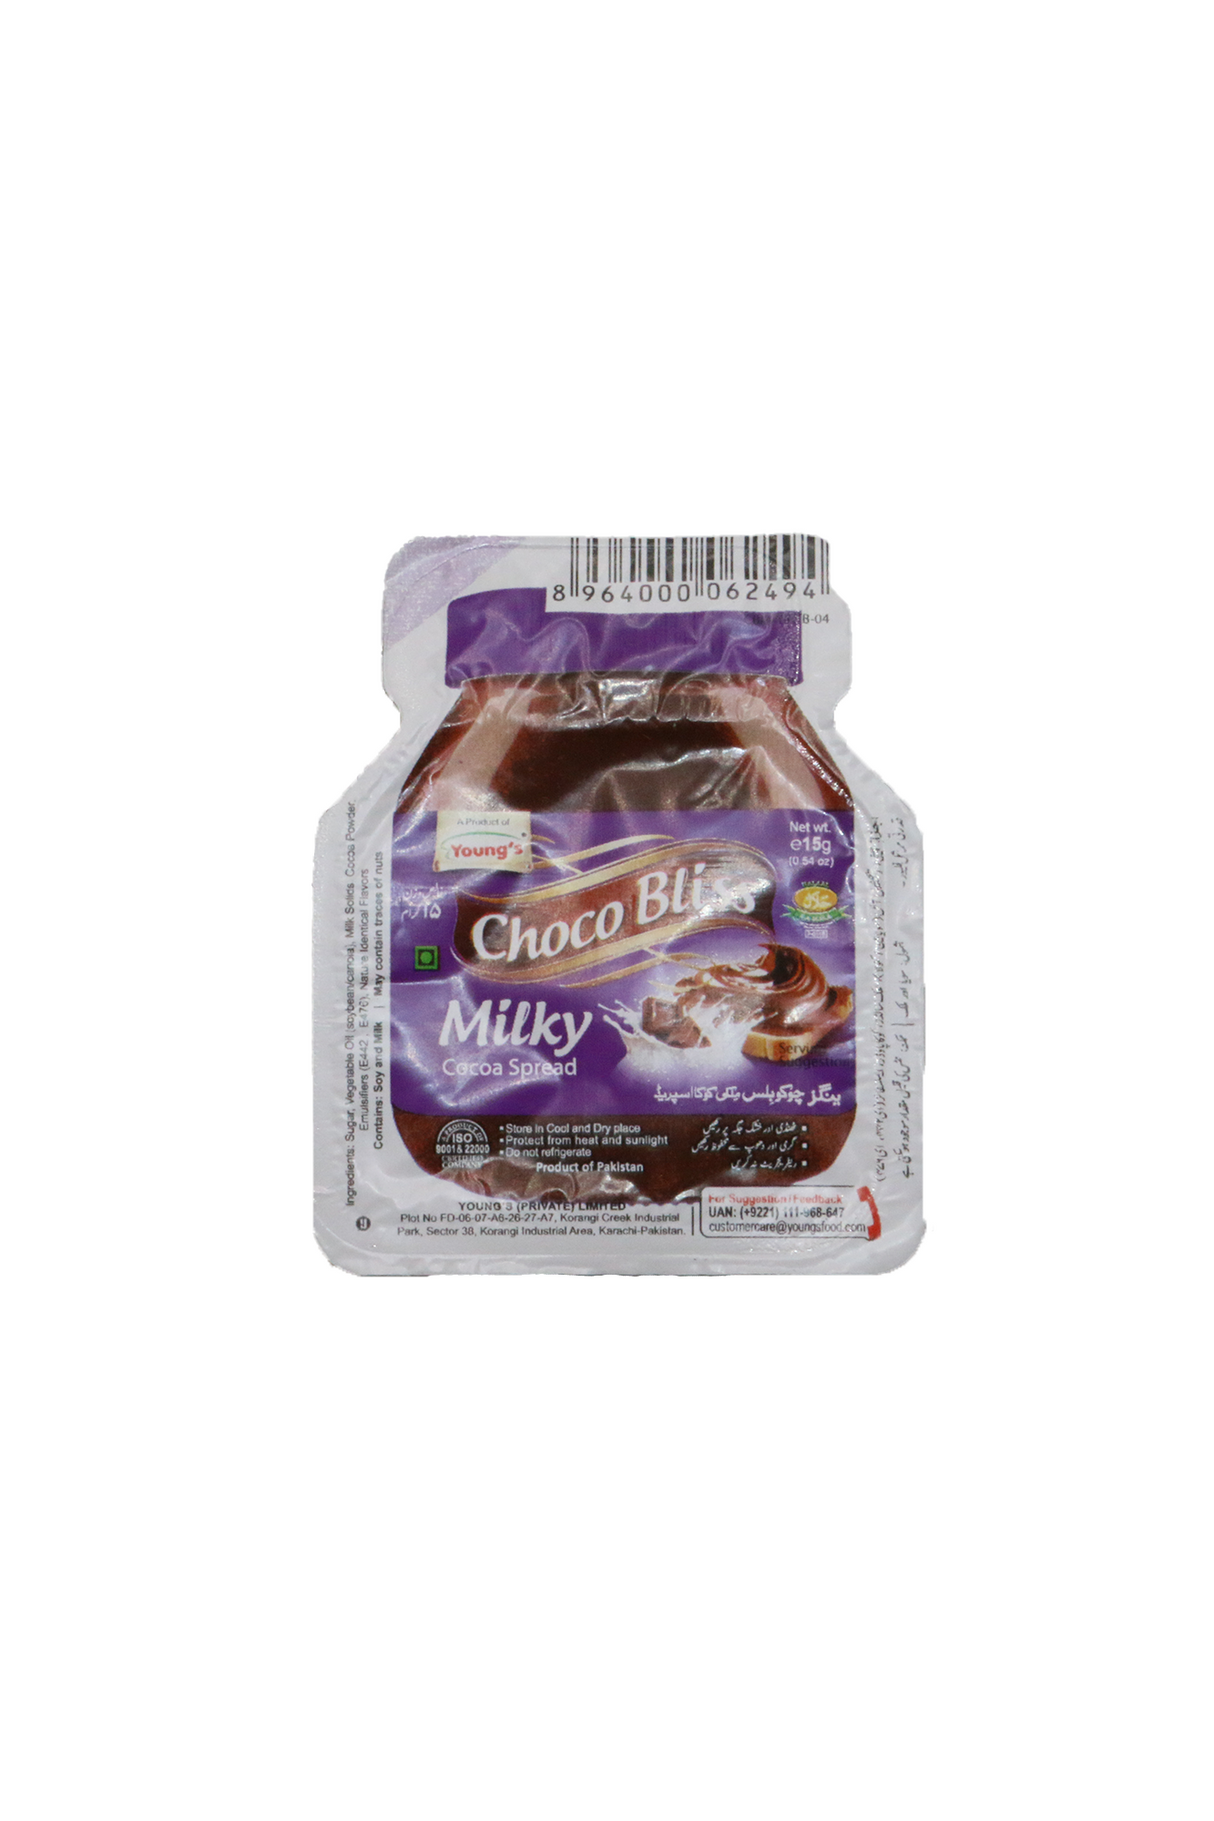 youngs choco bliss milky cocoa spread 15g